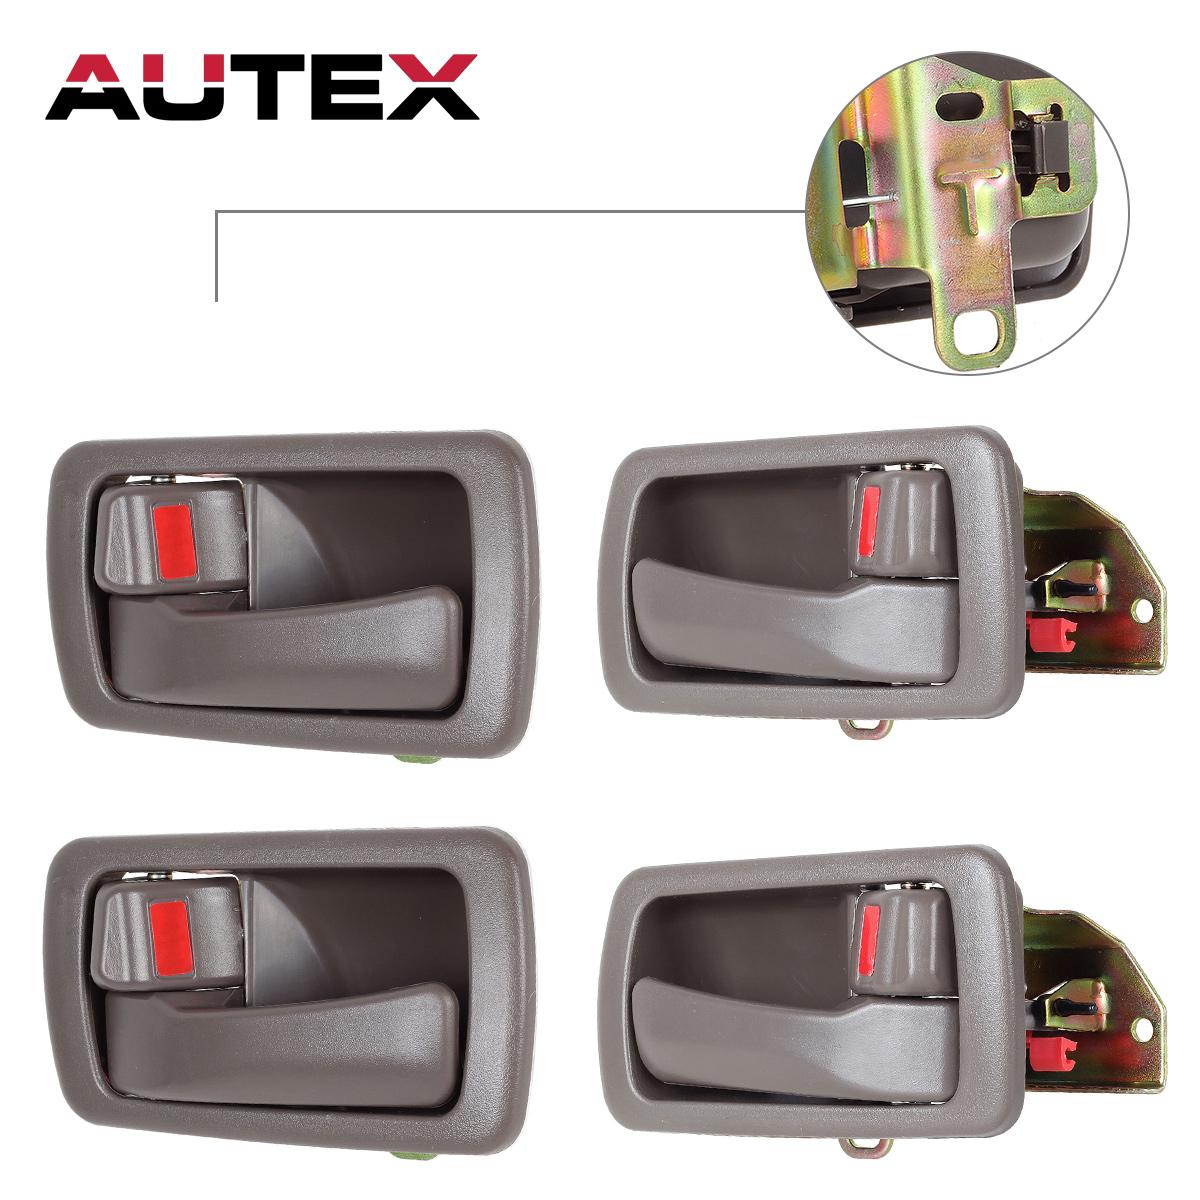 Details About 4x Brown Interior Door Handles Front Rear Left Right Side For 92 96 Toyota Camry